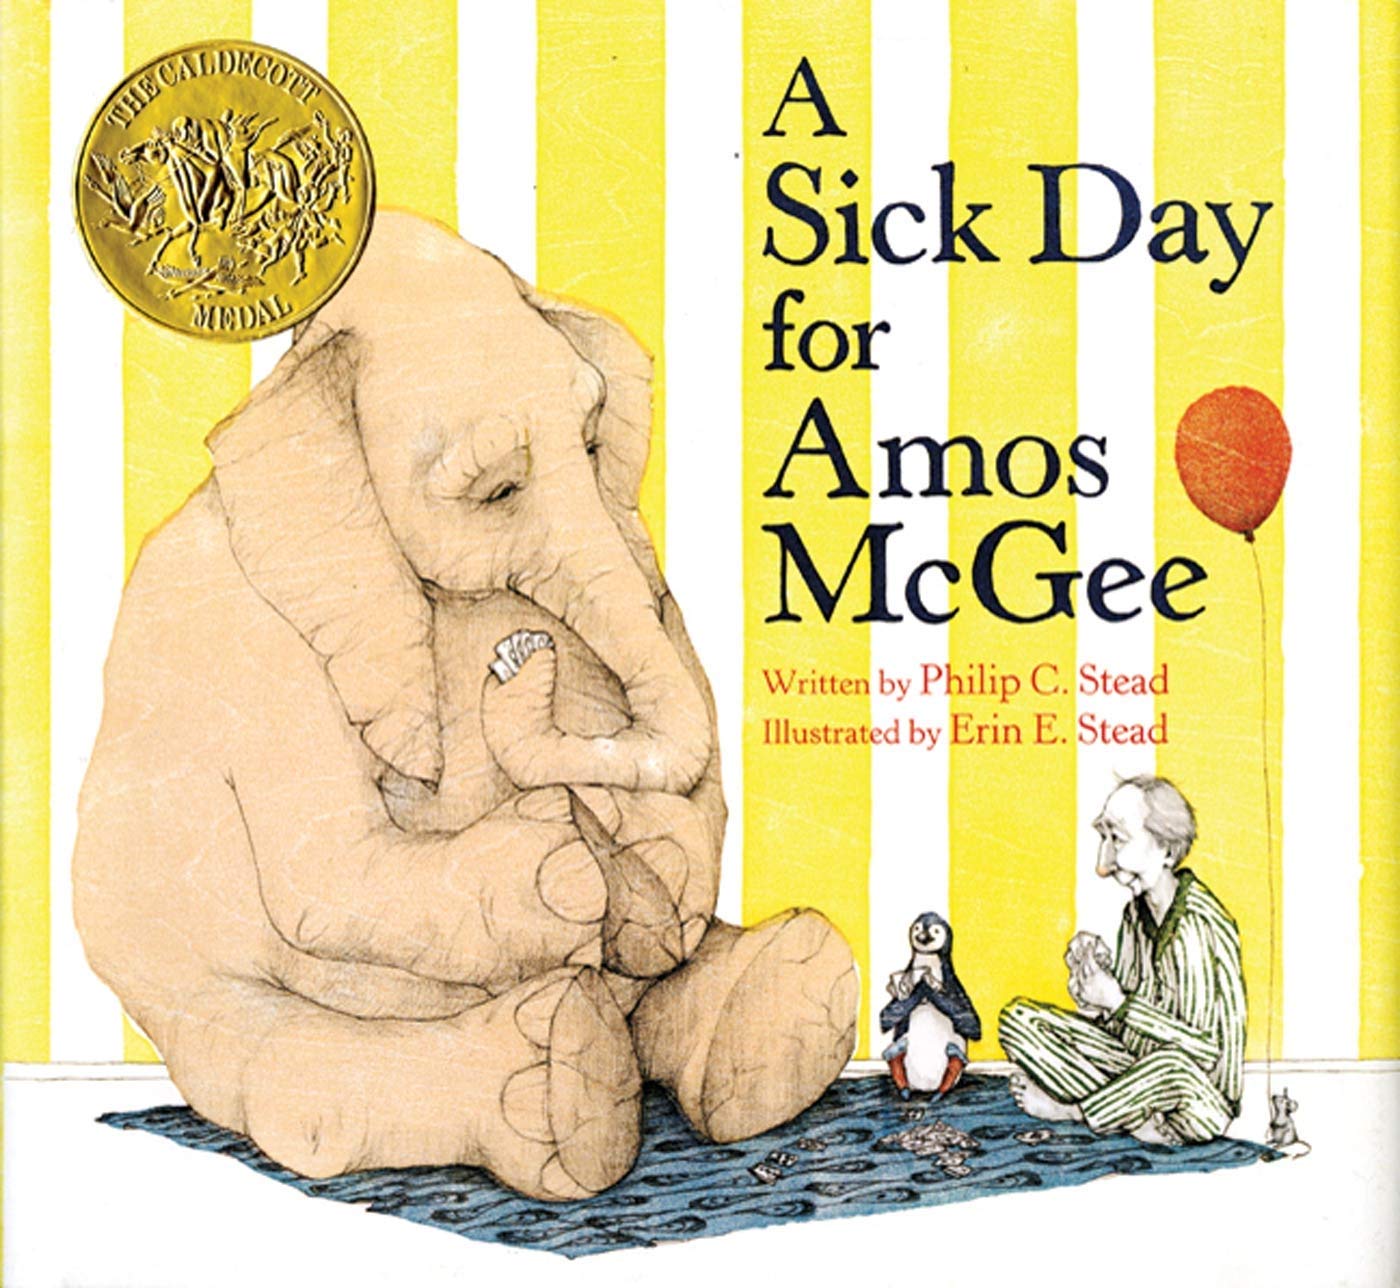 speech and language teaching concepts for A Sick Day for Amos McGee in speech therapy​ ​